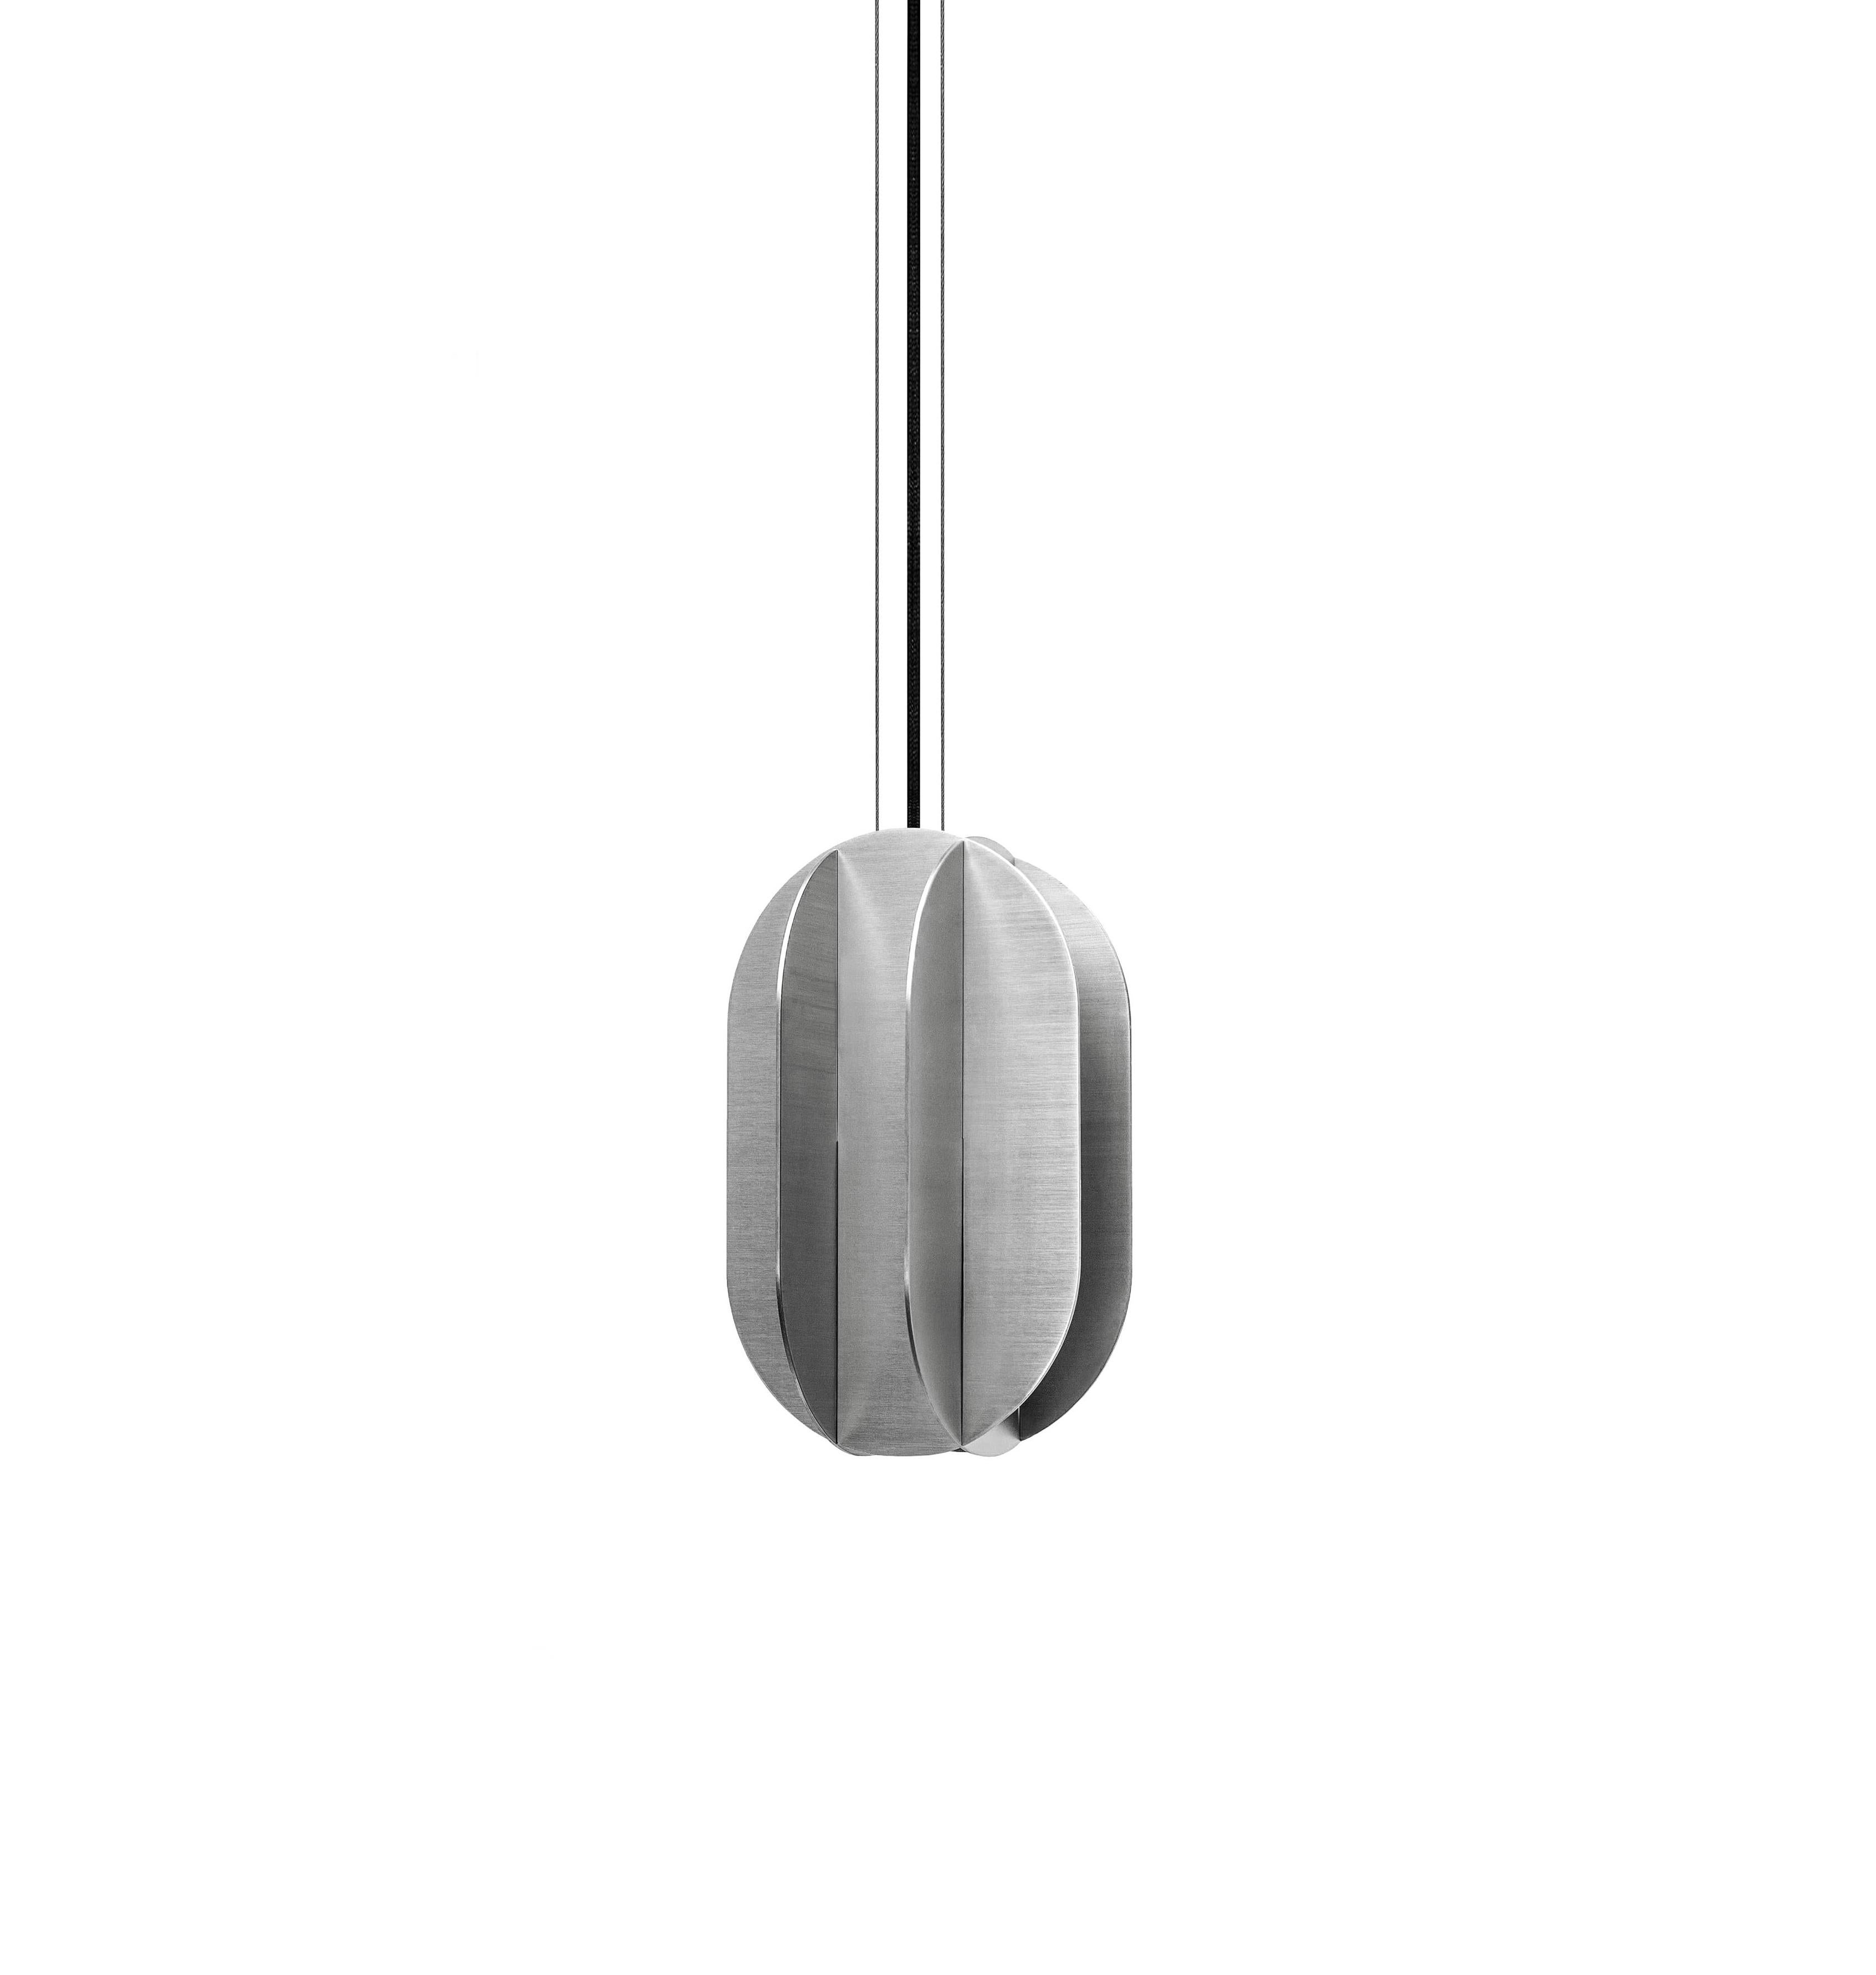 Ukrainian Set of Three Contemporary Pendant Lamp El Lamps CS3 by Noom in Stainless Steel